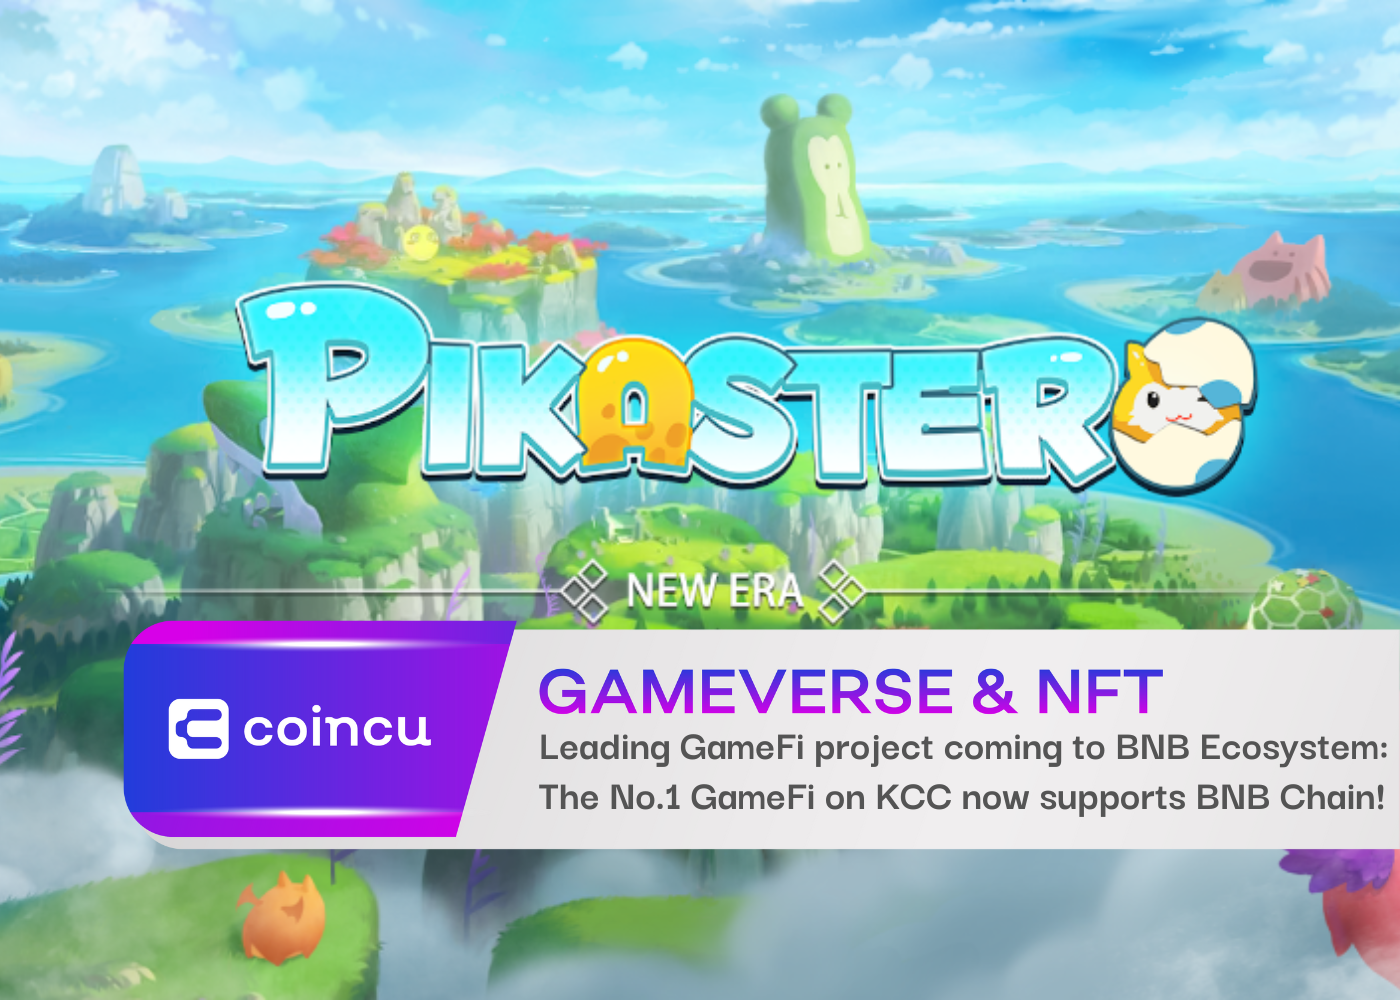 Pikaster - the leading GameFi project on KCC